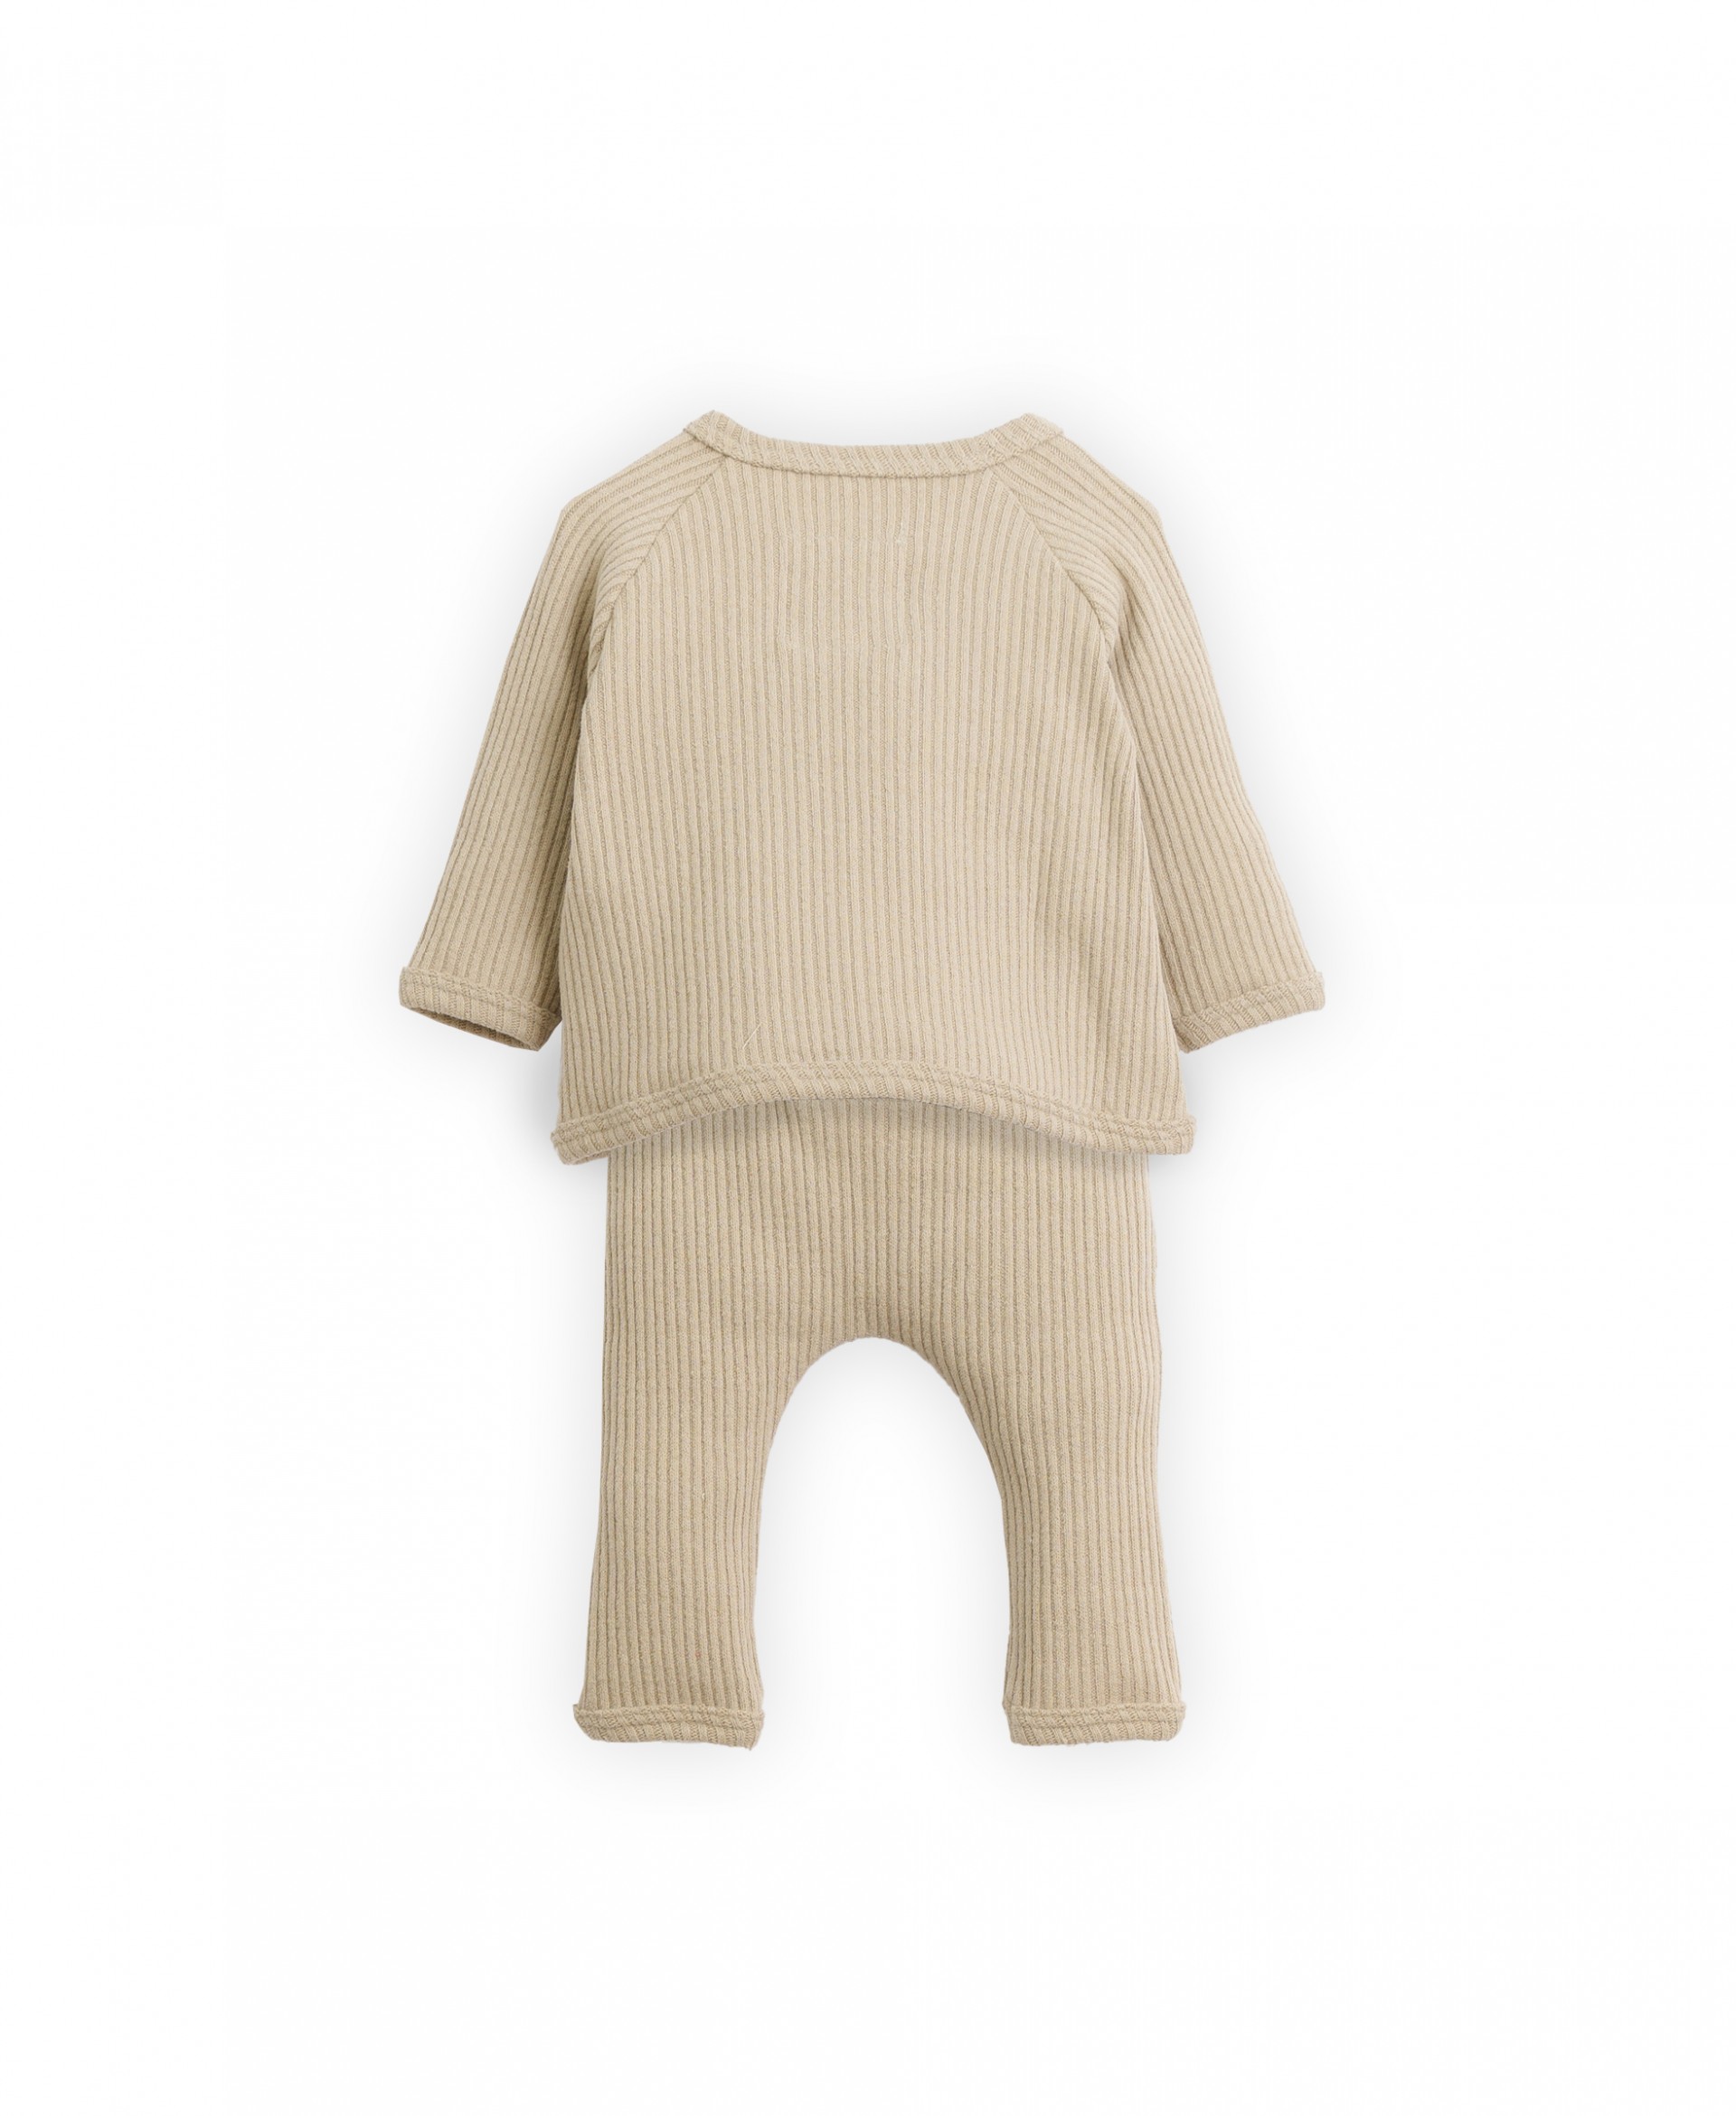 knit jersey and trouser outfit | Culinary